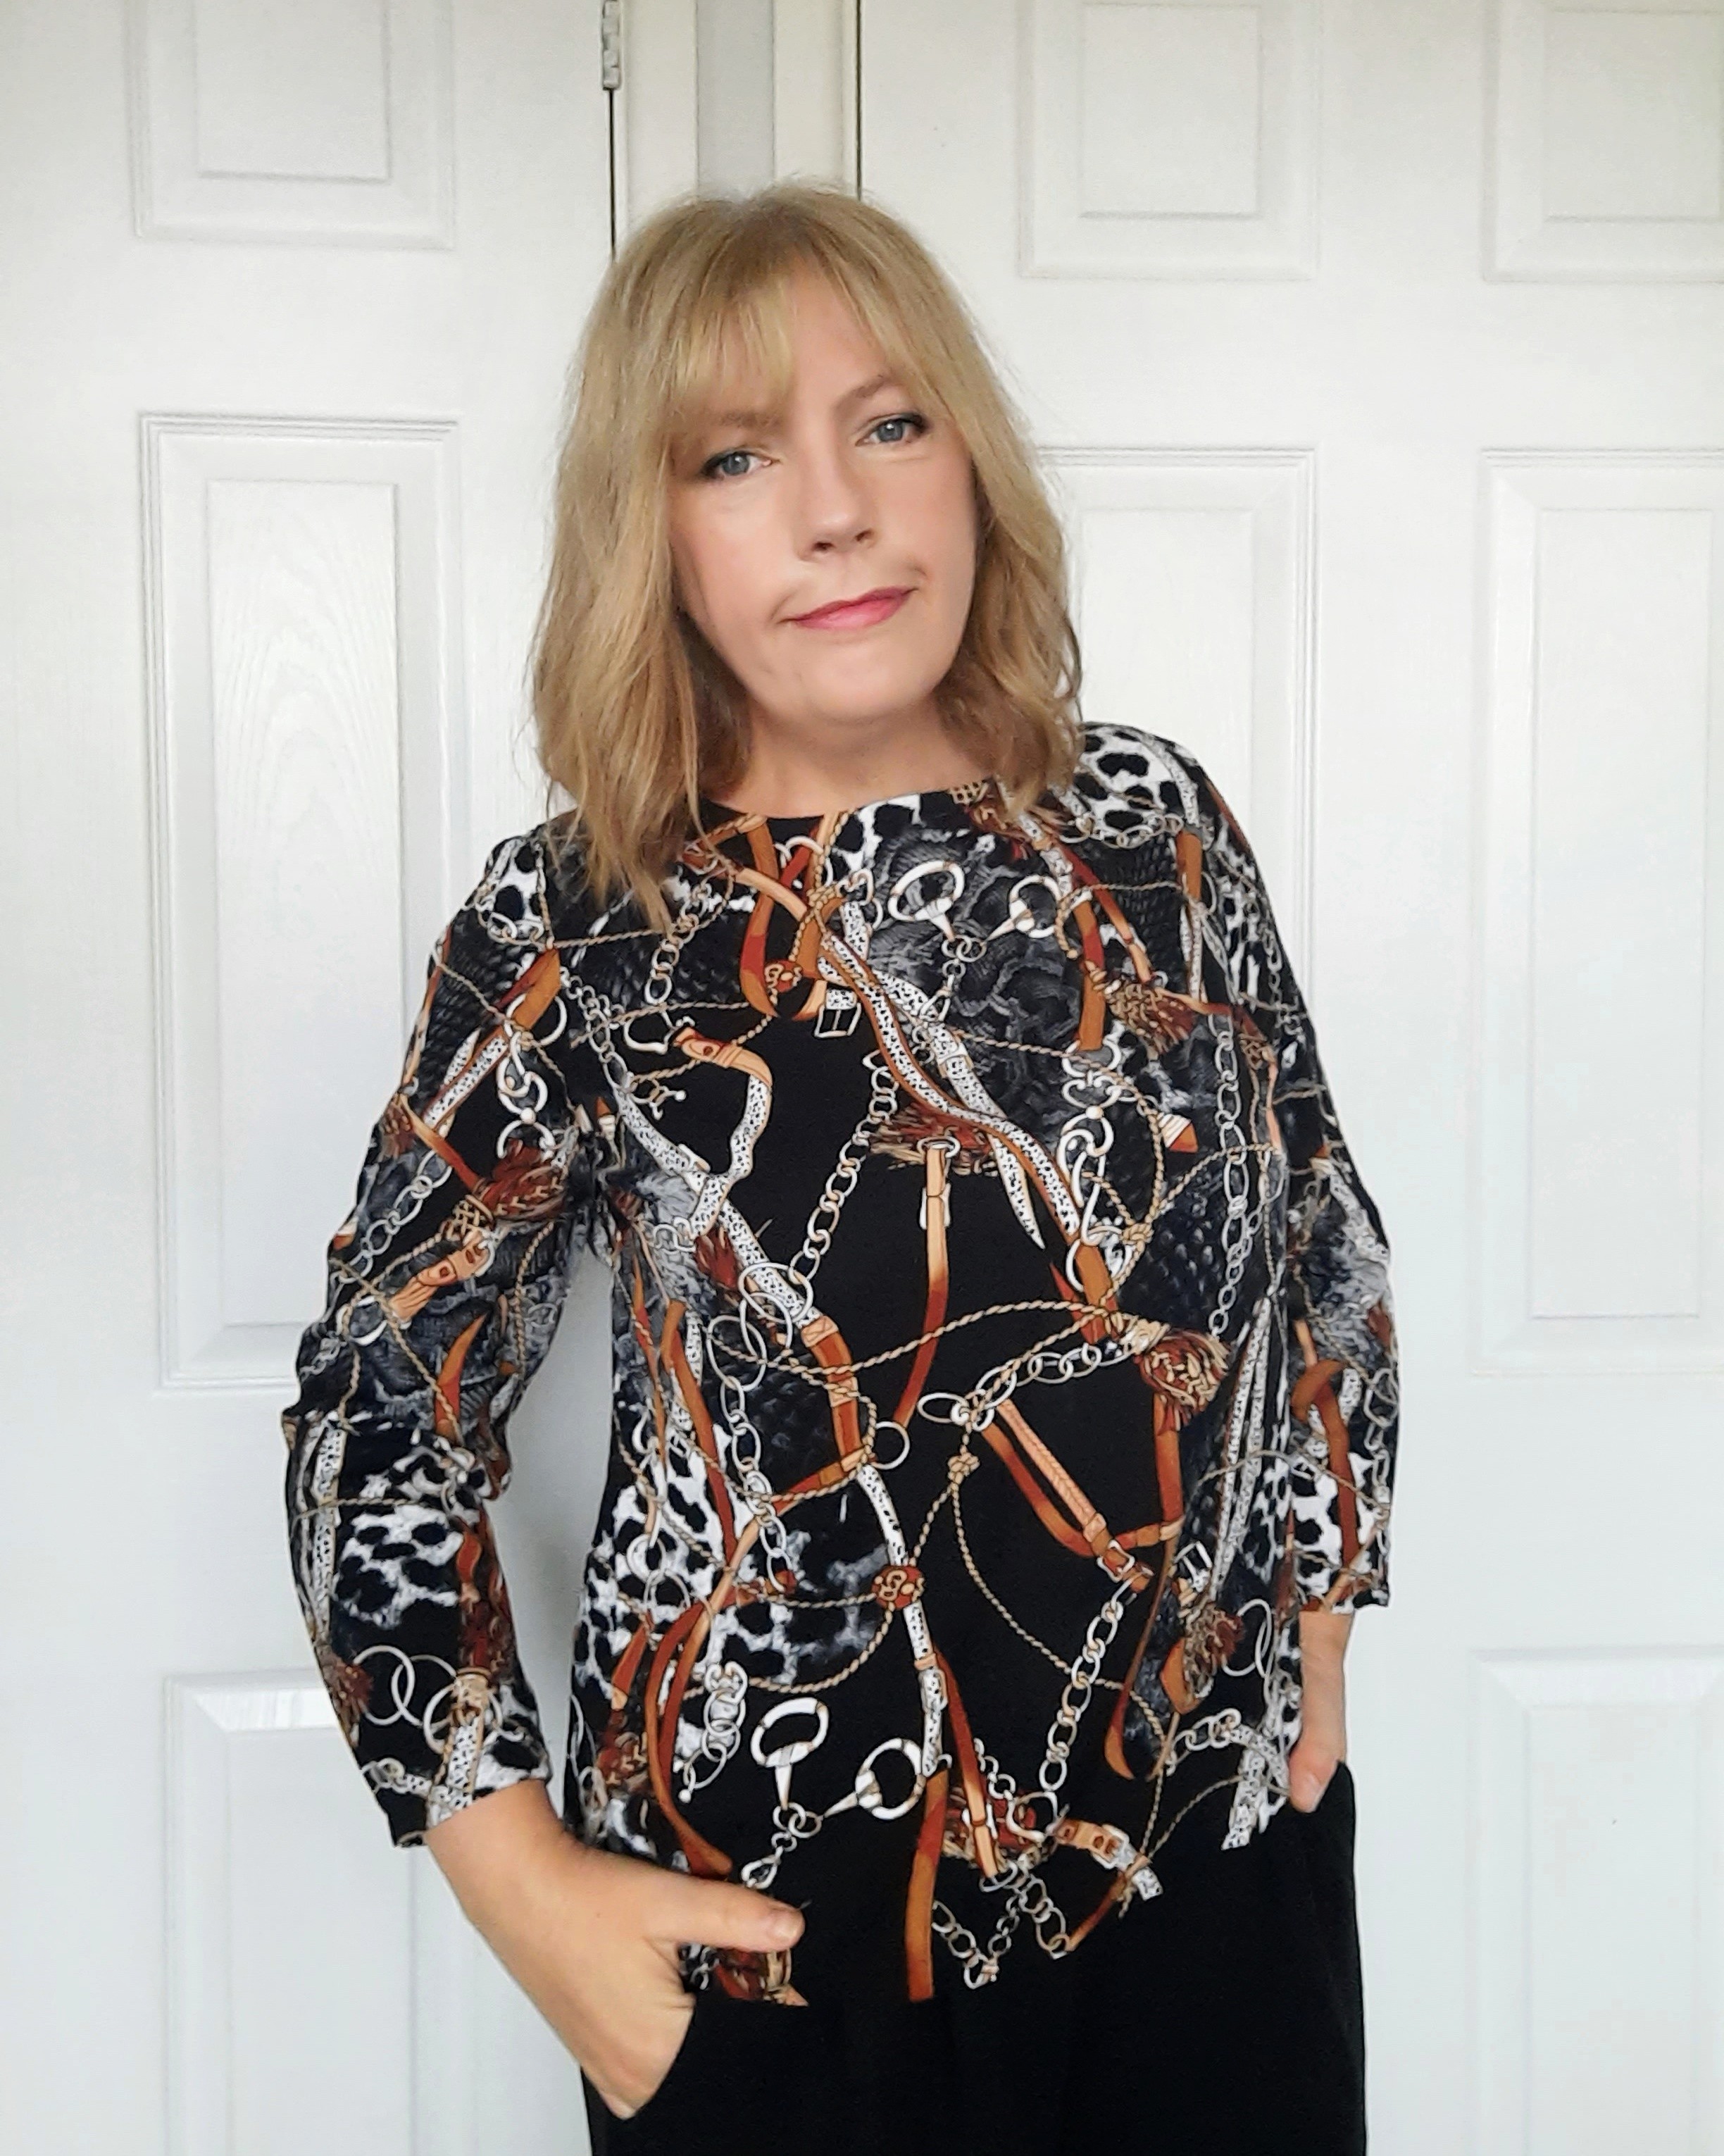 Perfecting Fit : the Sew Over It Whitley Top Redrafted